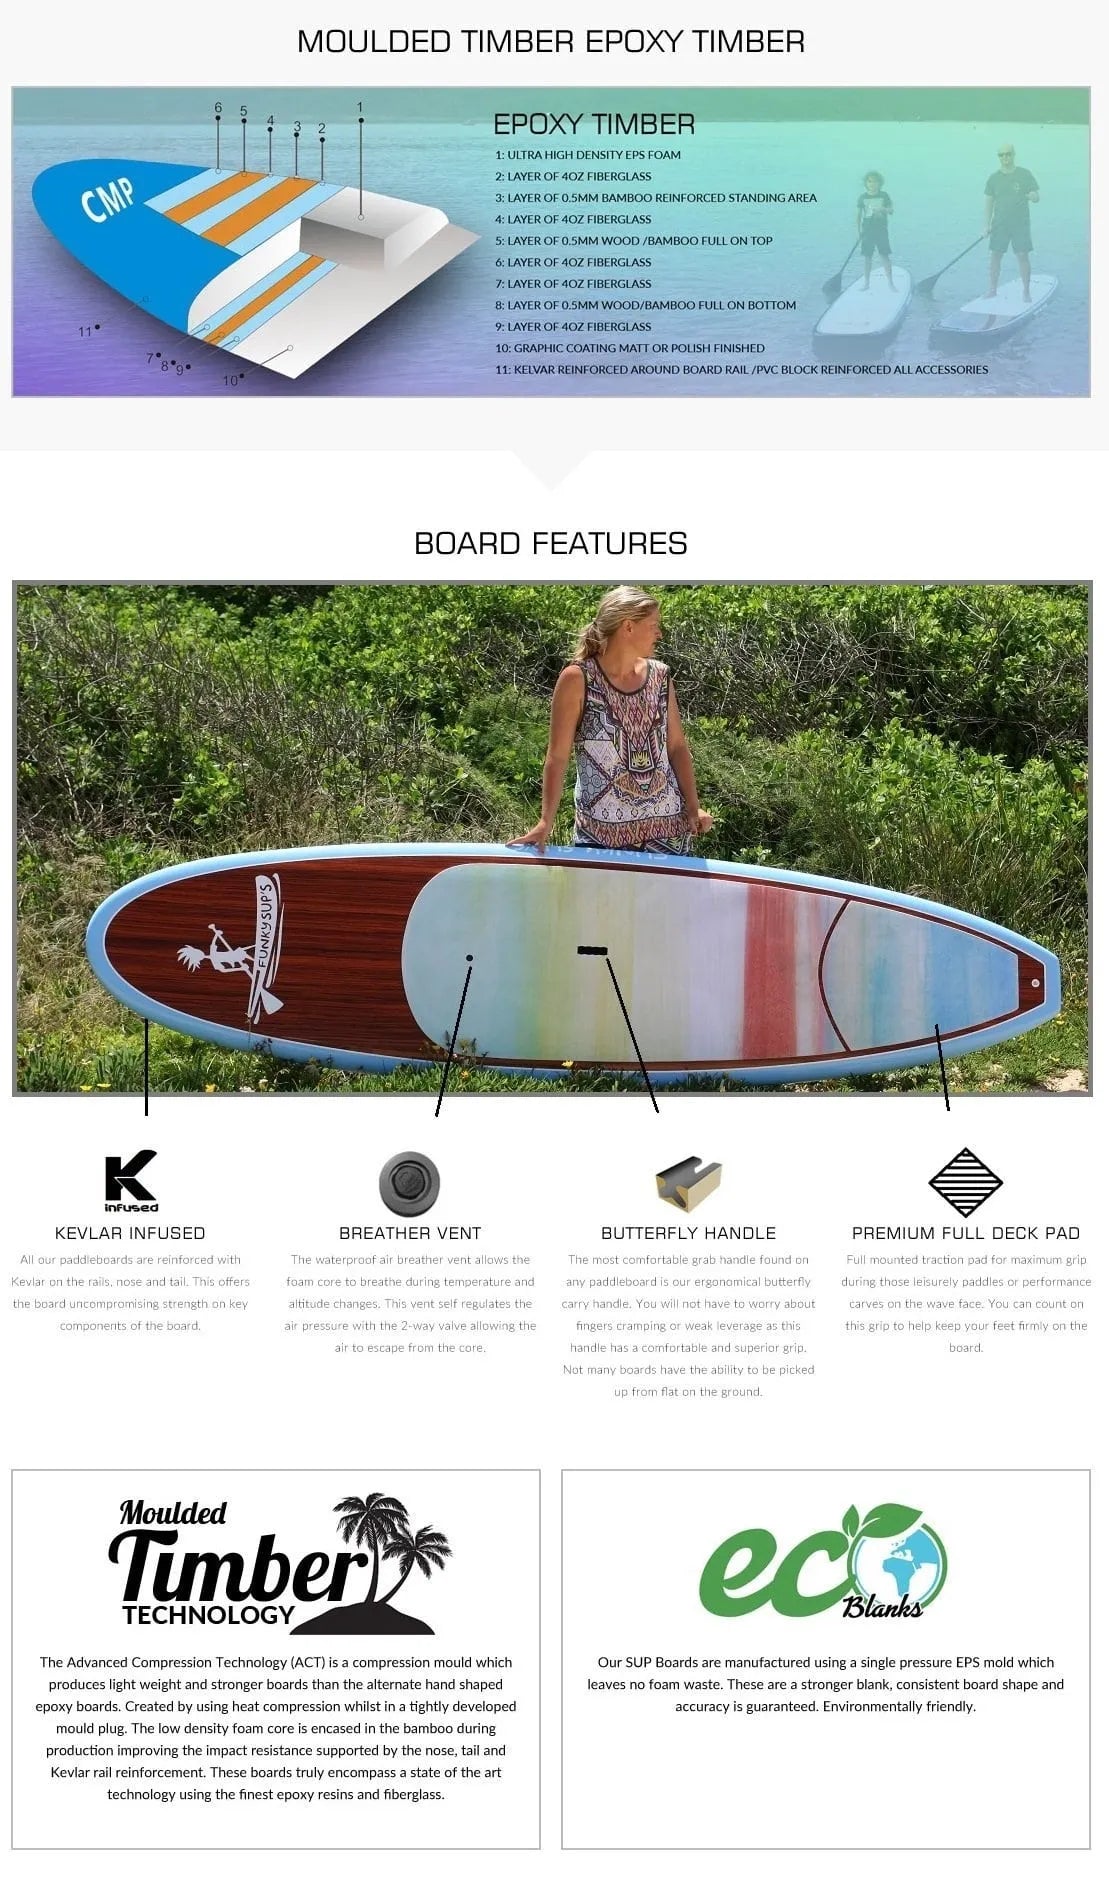 FUNKY SUPS Tutti Frutti SUP features and construction